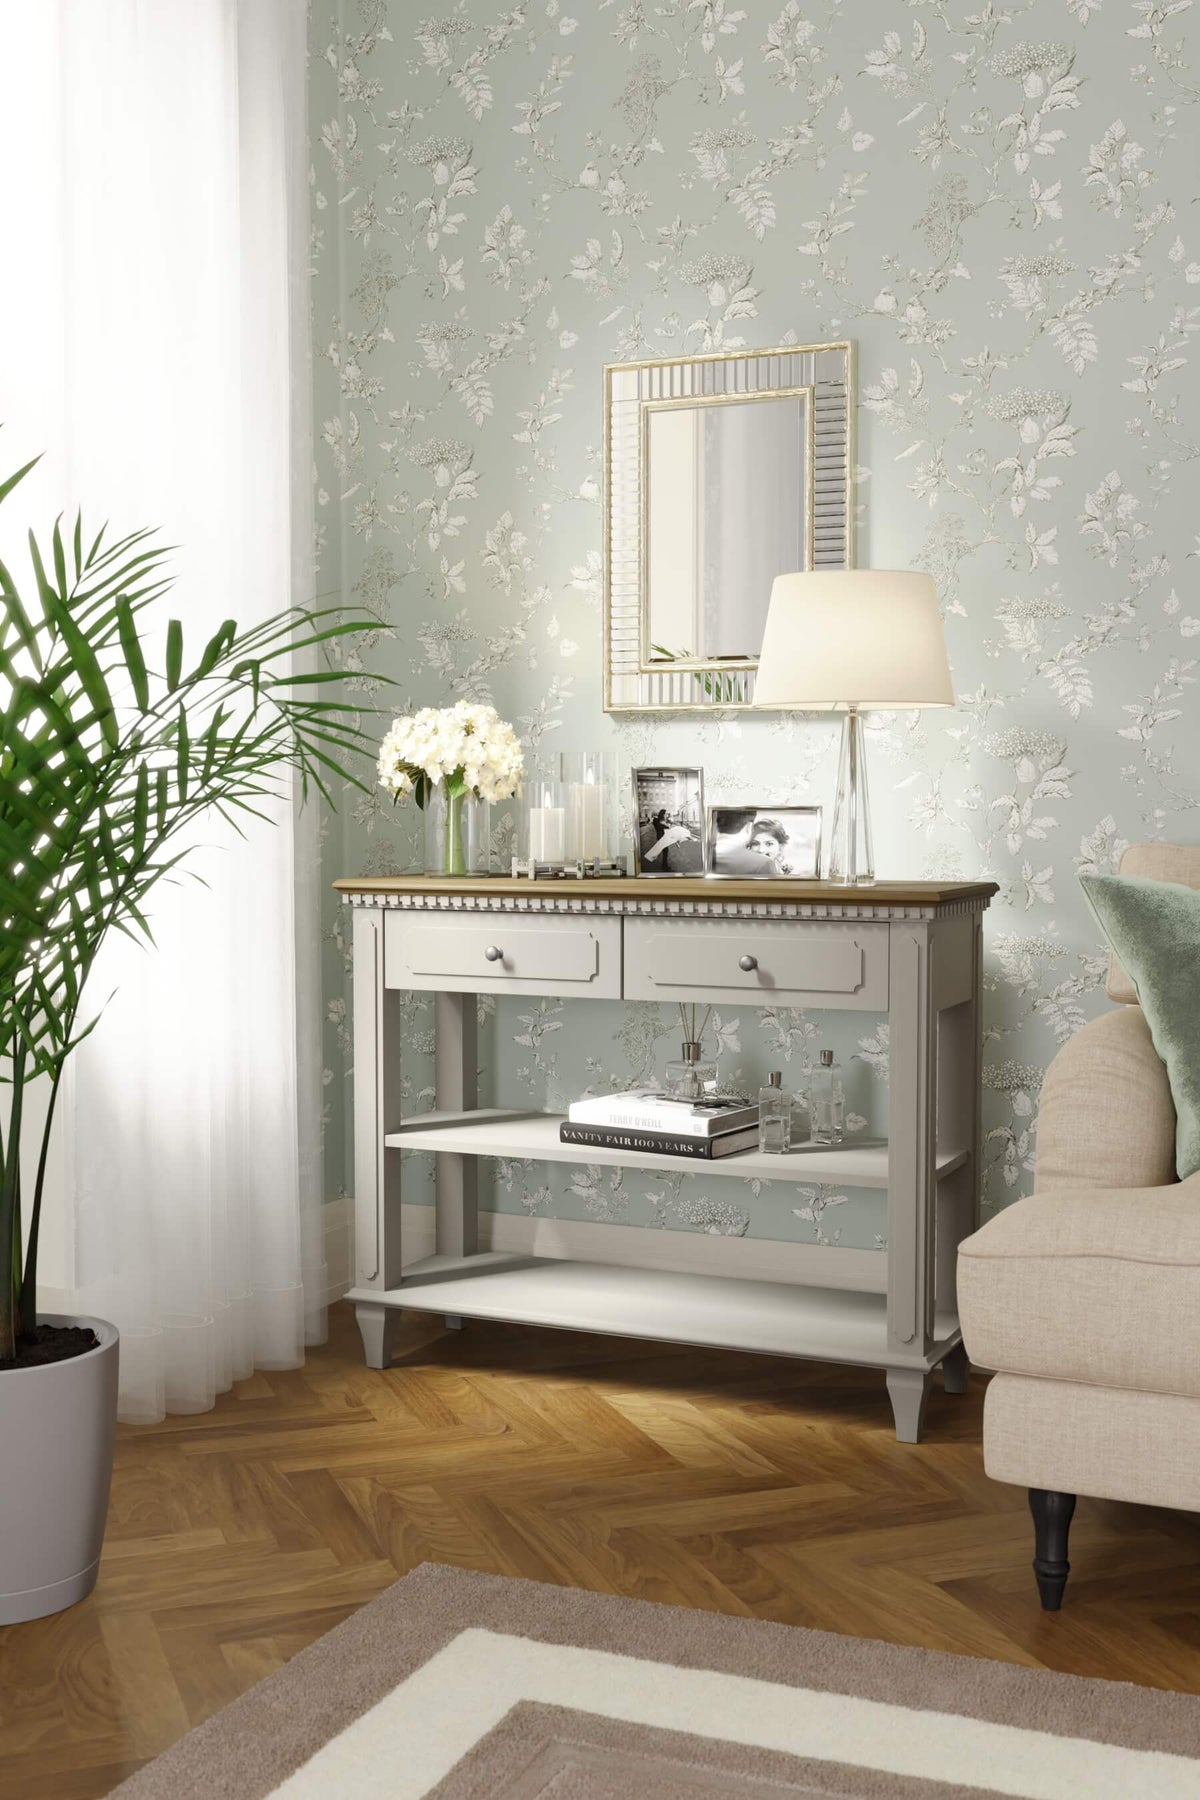 Hanover 2 Drawer Console Table